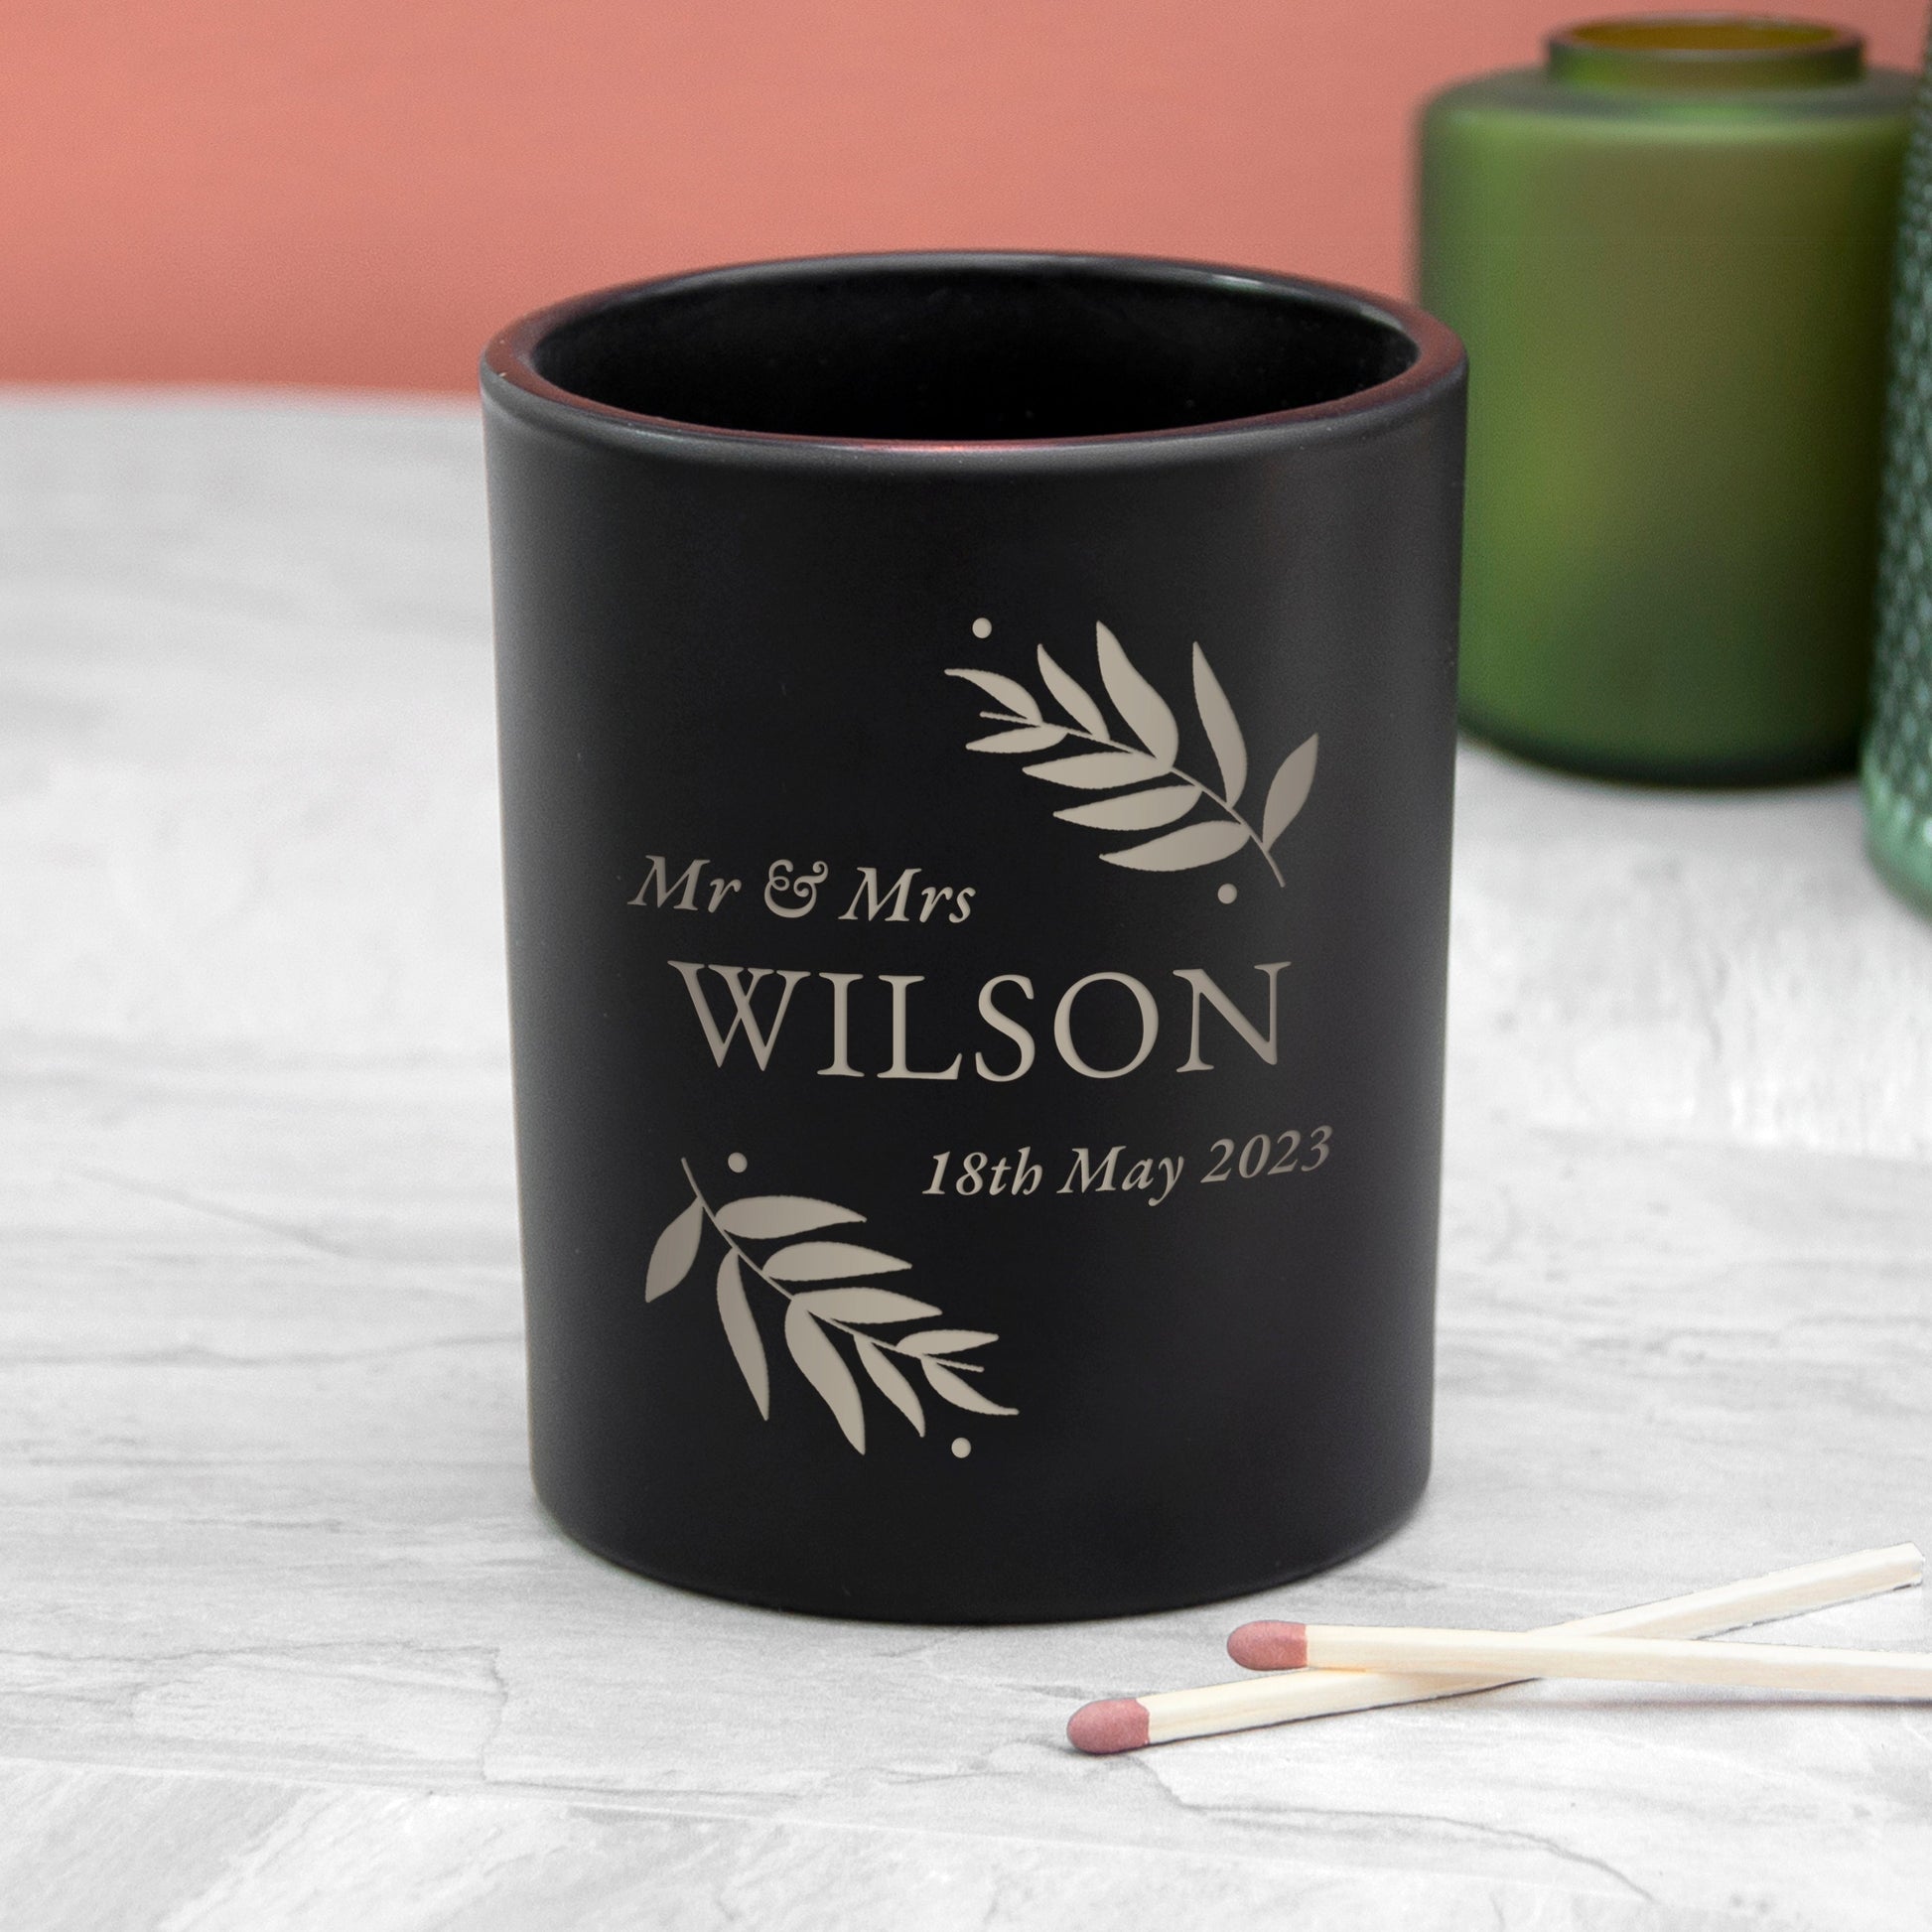 Personalized Candle Holders - Personalized Wedding Date Candle Holder 